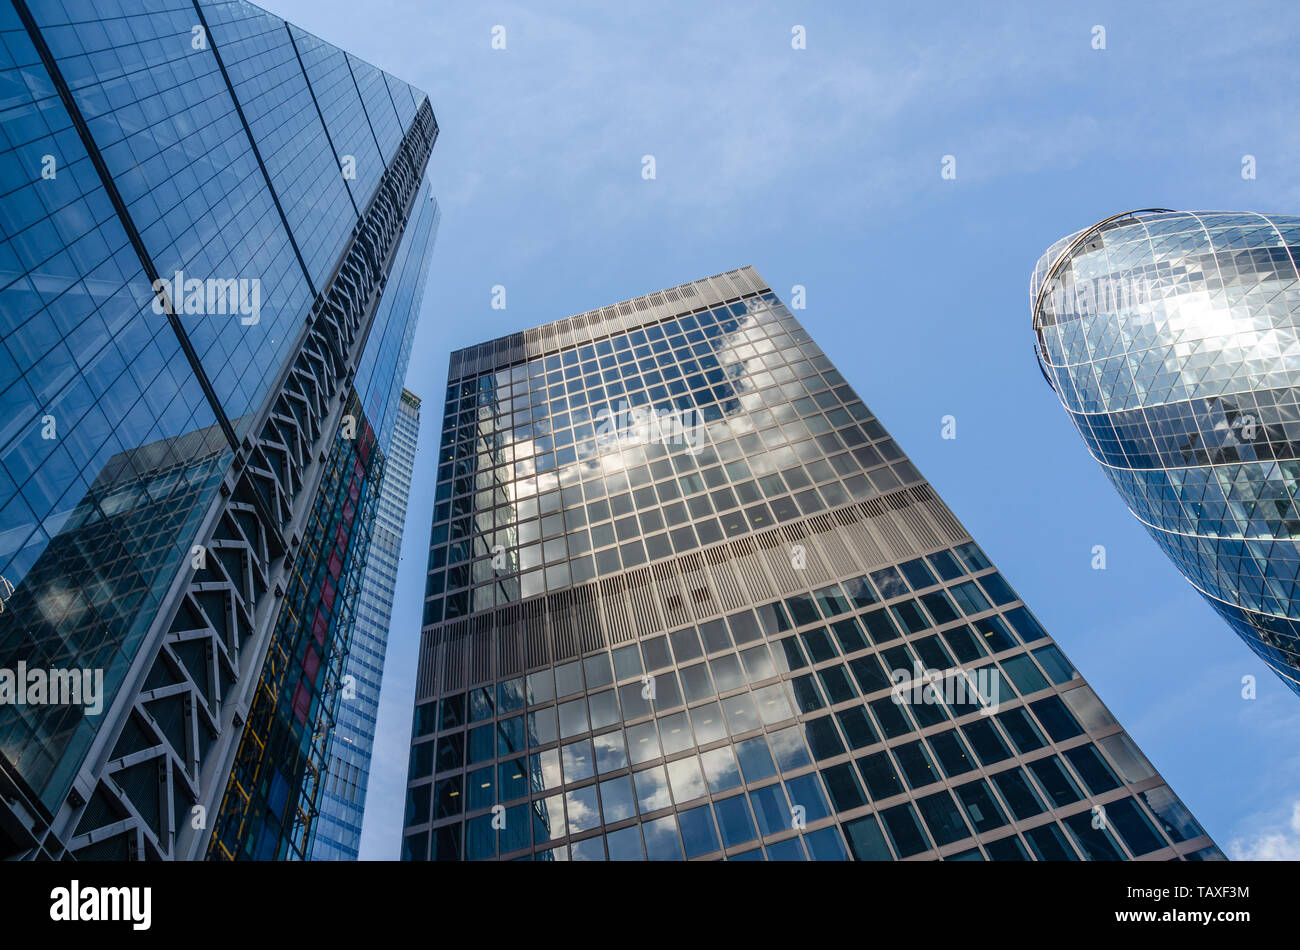 Looking up at the top of The Leadenhall Building, The Gherkin and St Helen's Tower in the Financial District of The City of London. Stock Photo